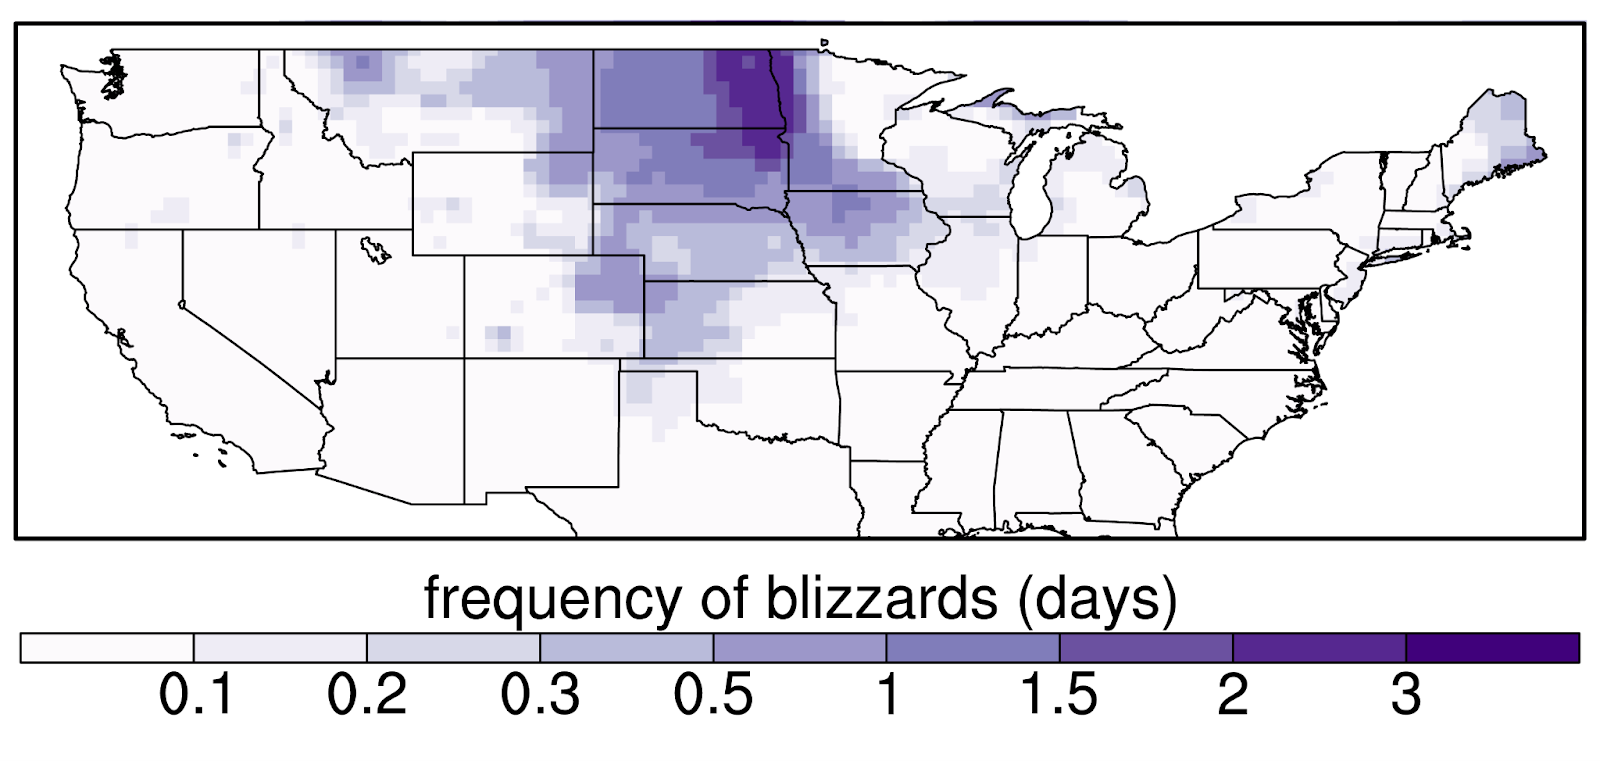 Frequency of blizzards